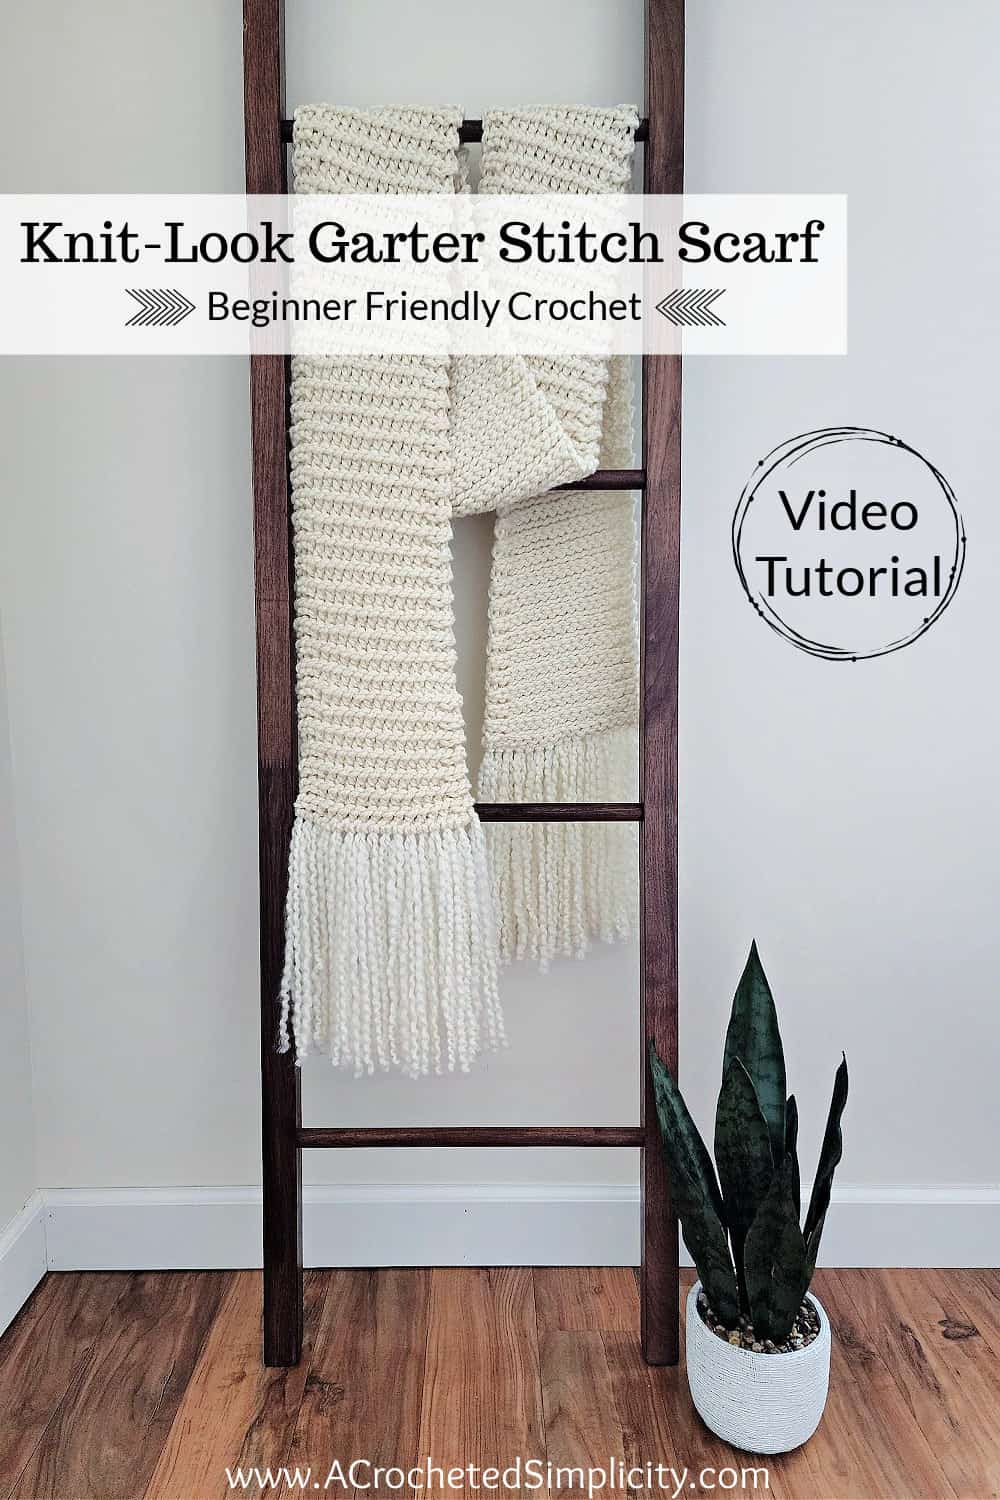 Knit look crochet scarf hanging on a wooden blanket ladder with potted plant.